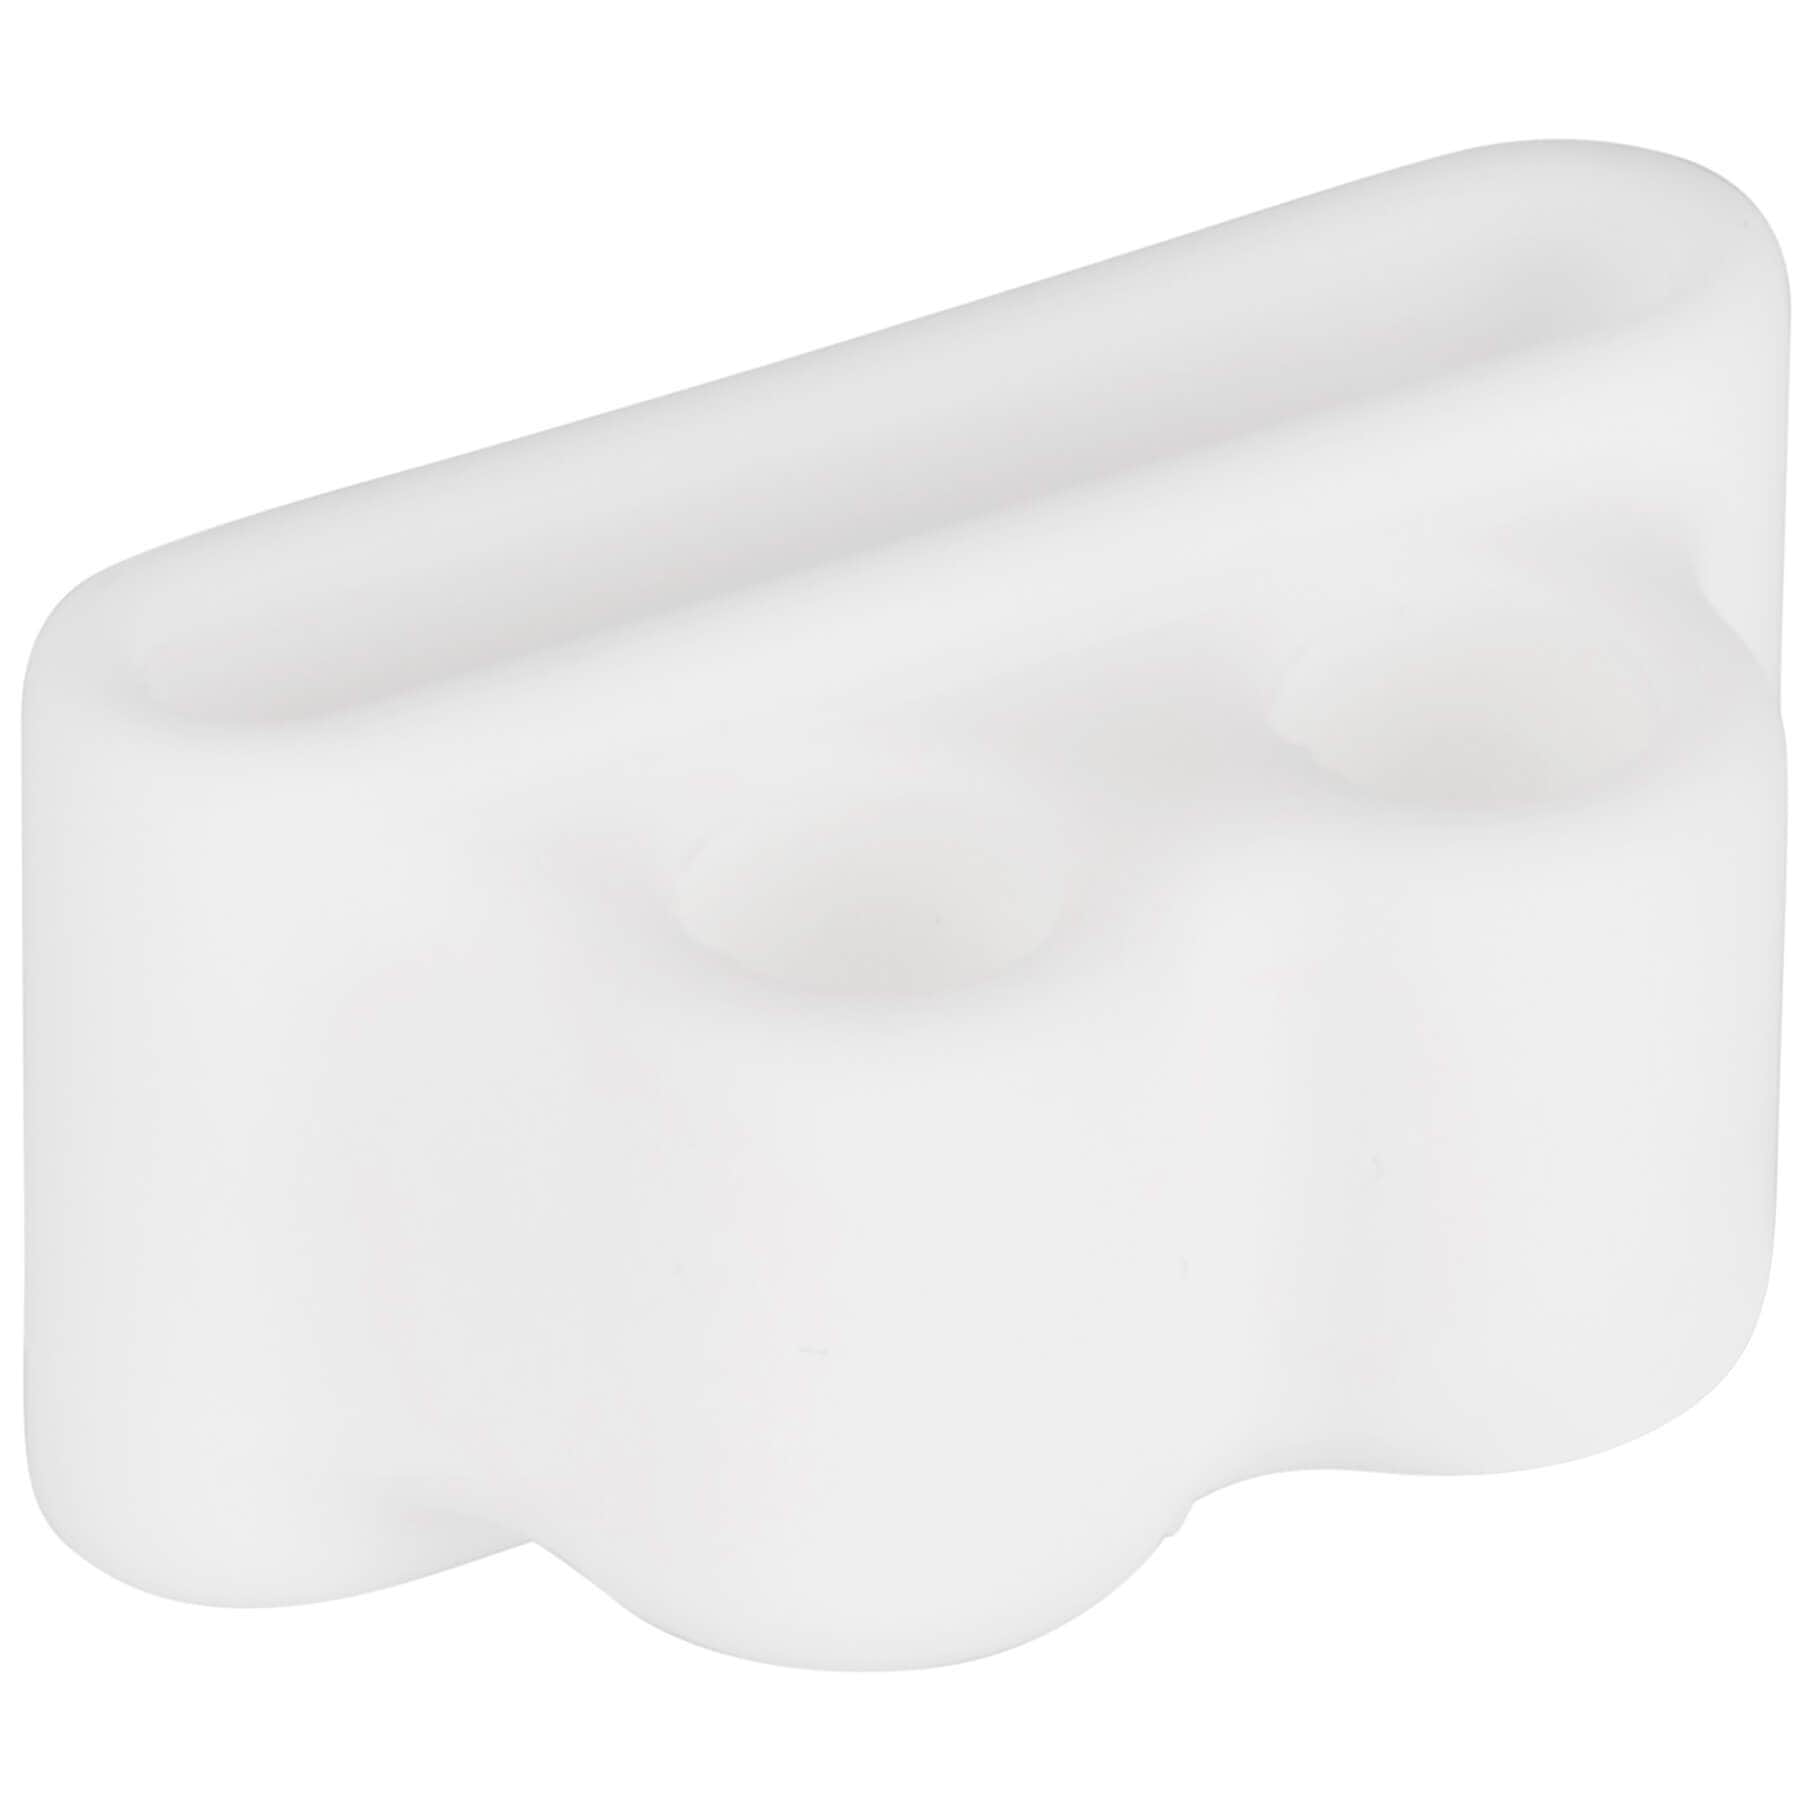 White AirPods Holder attaches to Watch Band. color::White